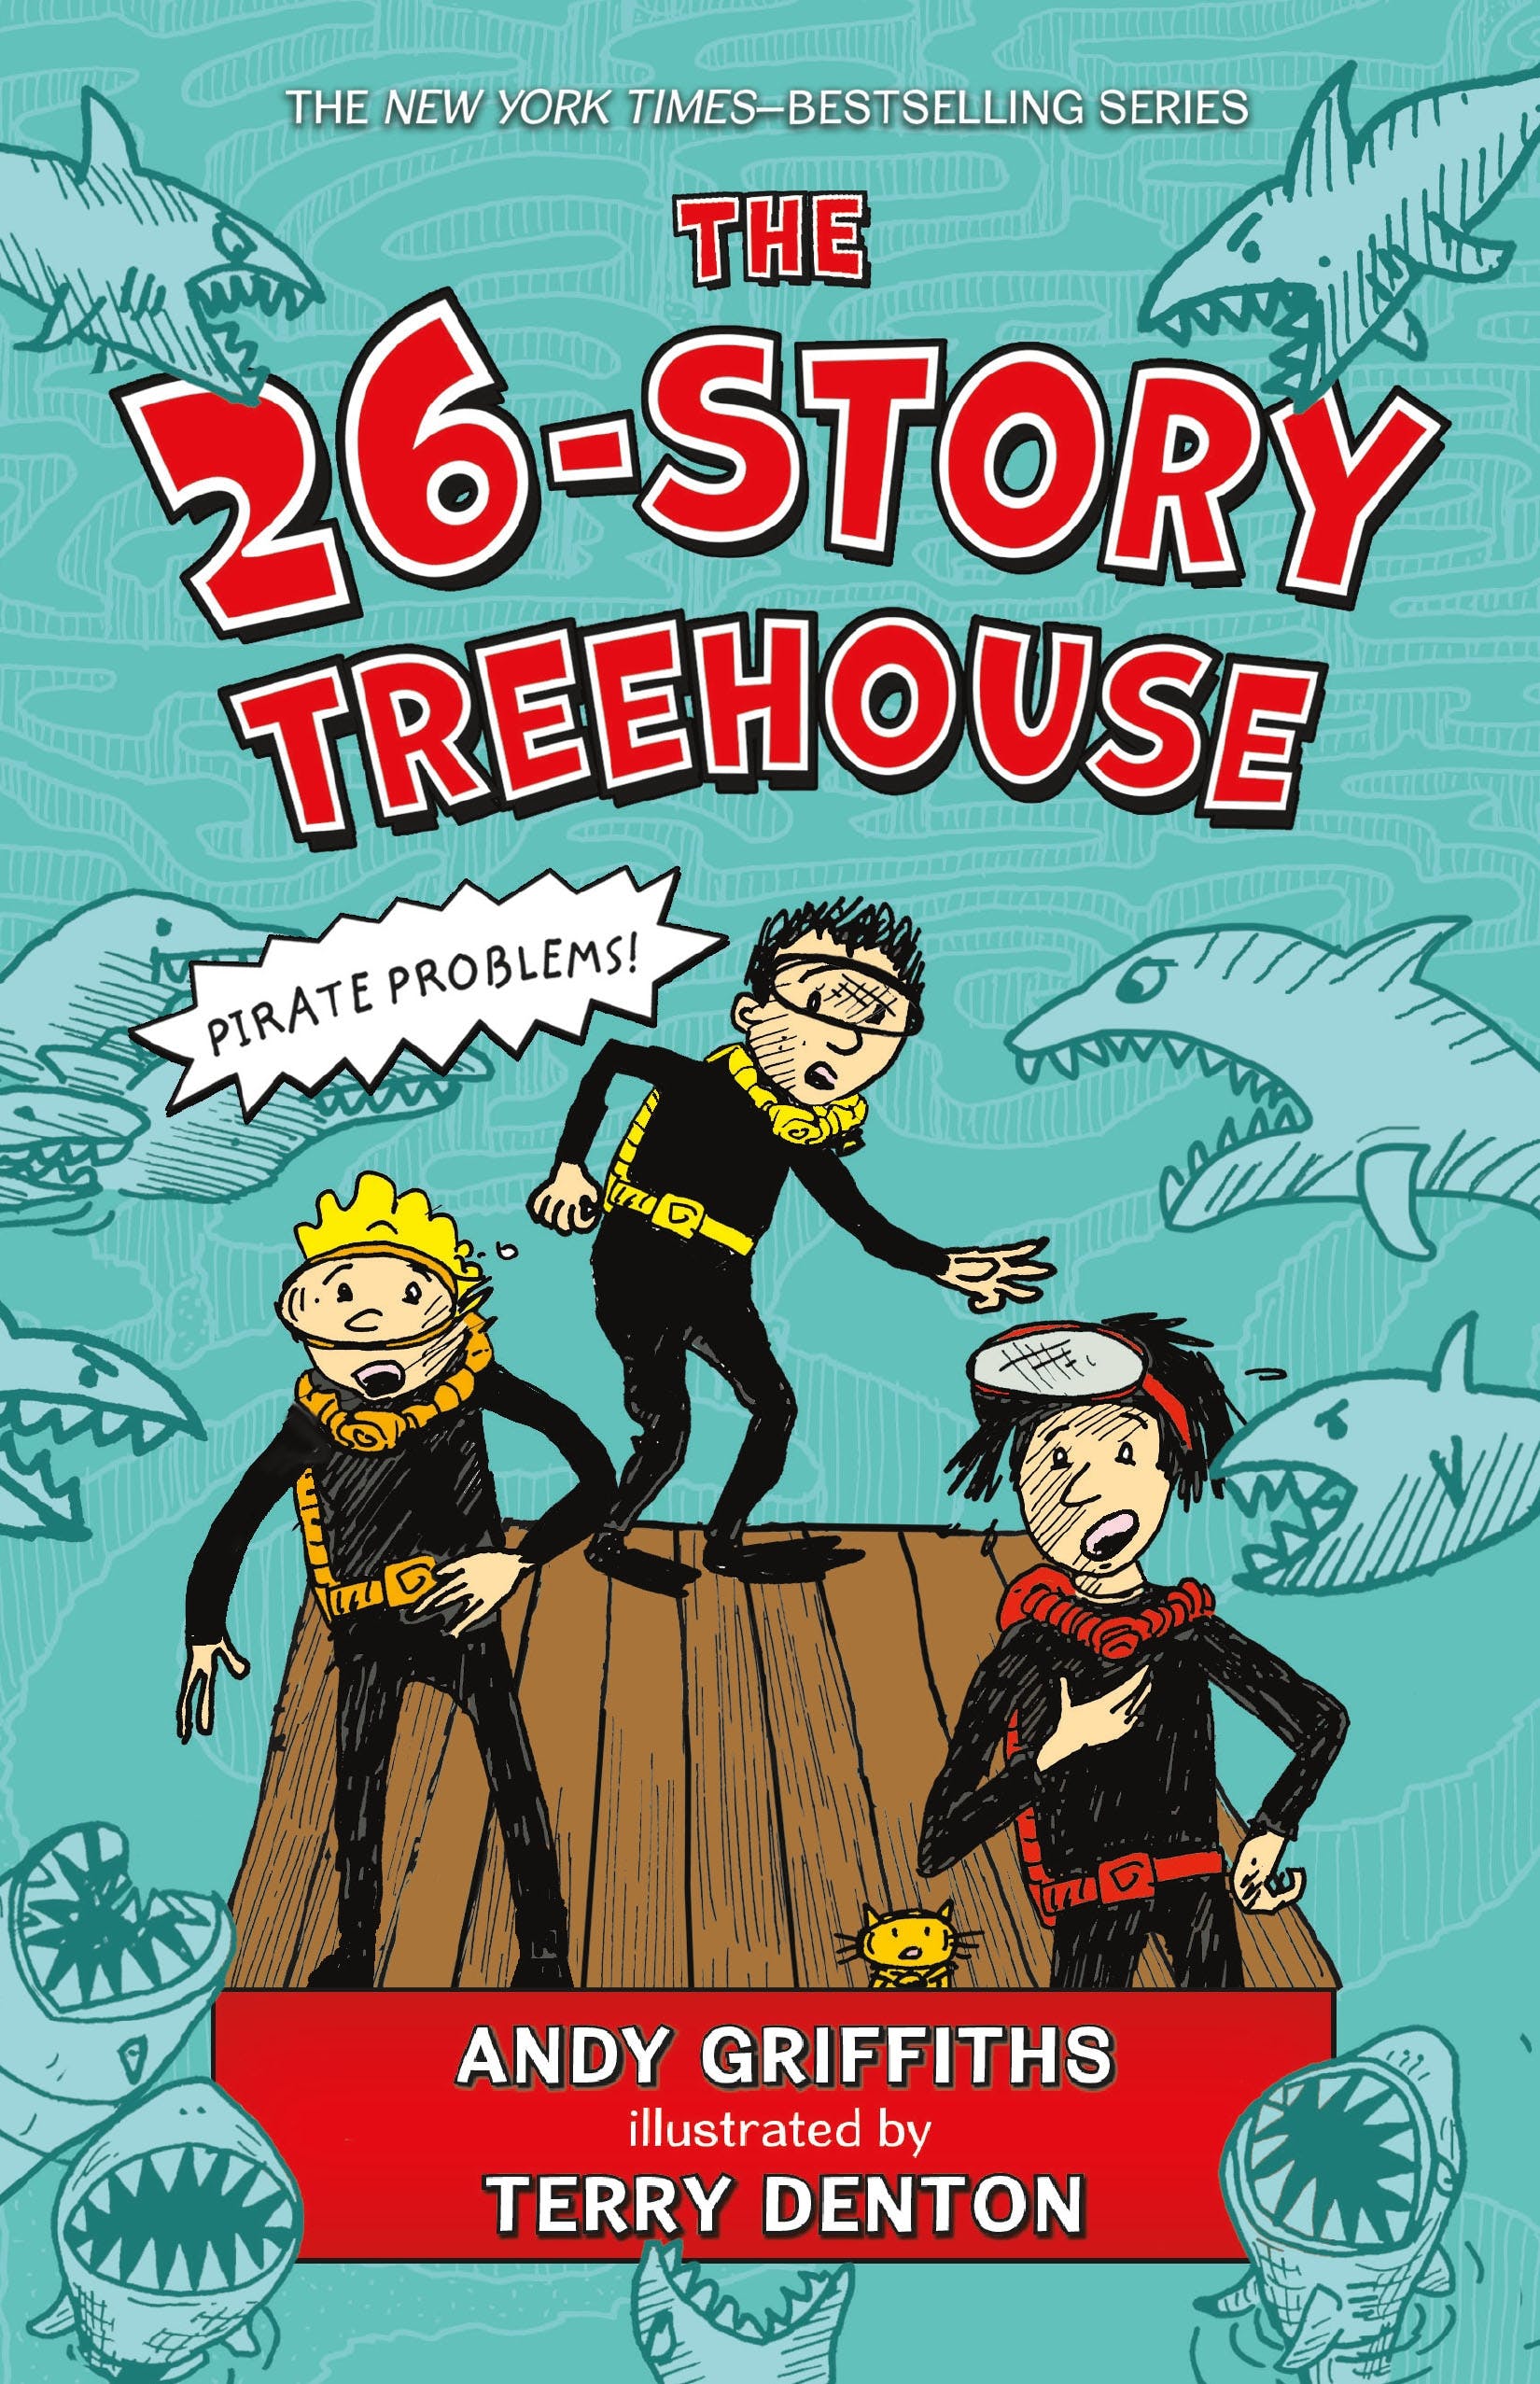 The 26-story treehouse : pirate problems!